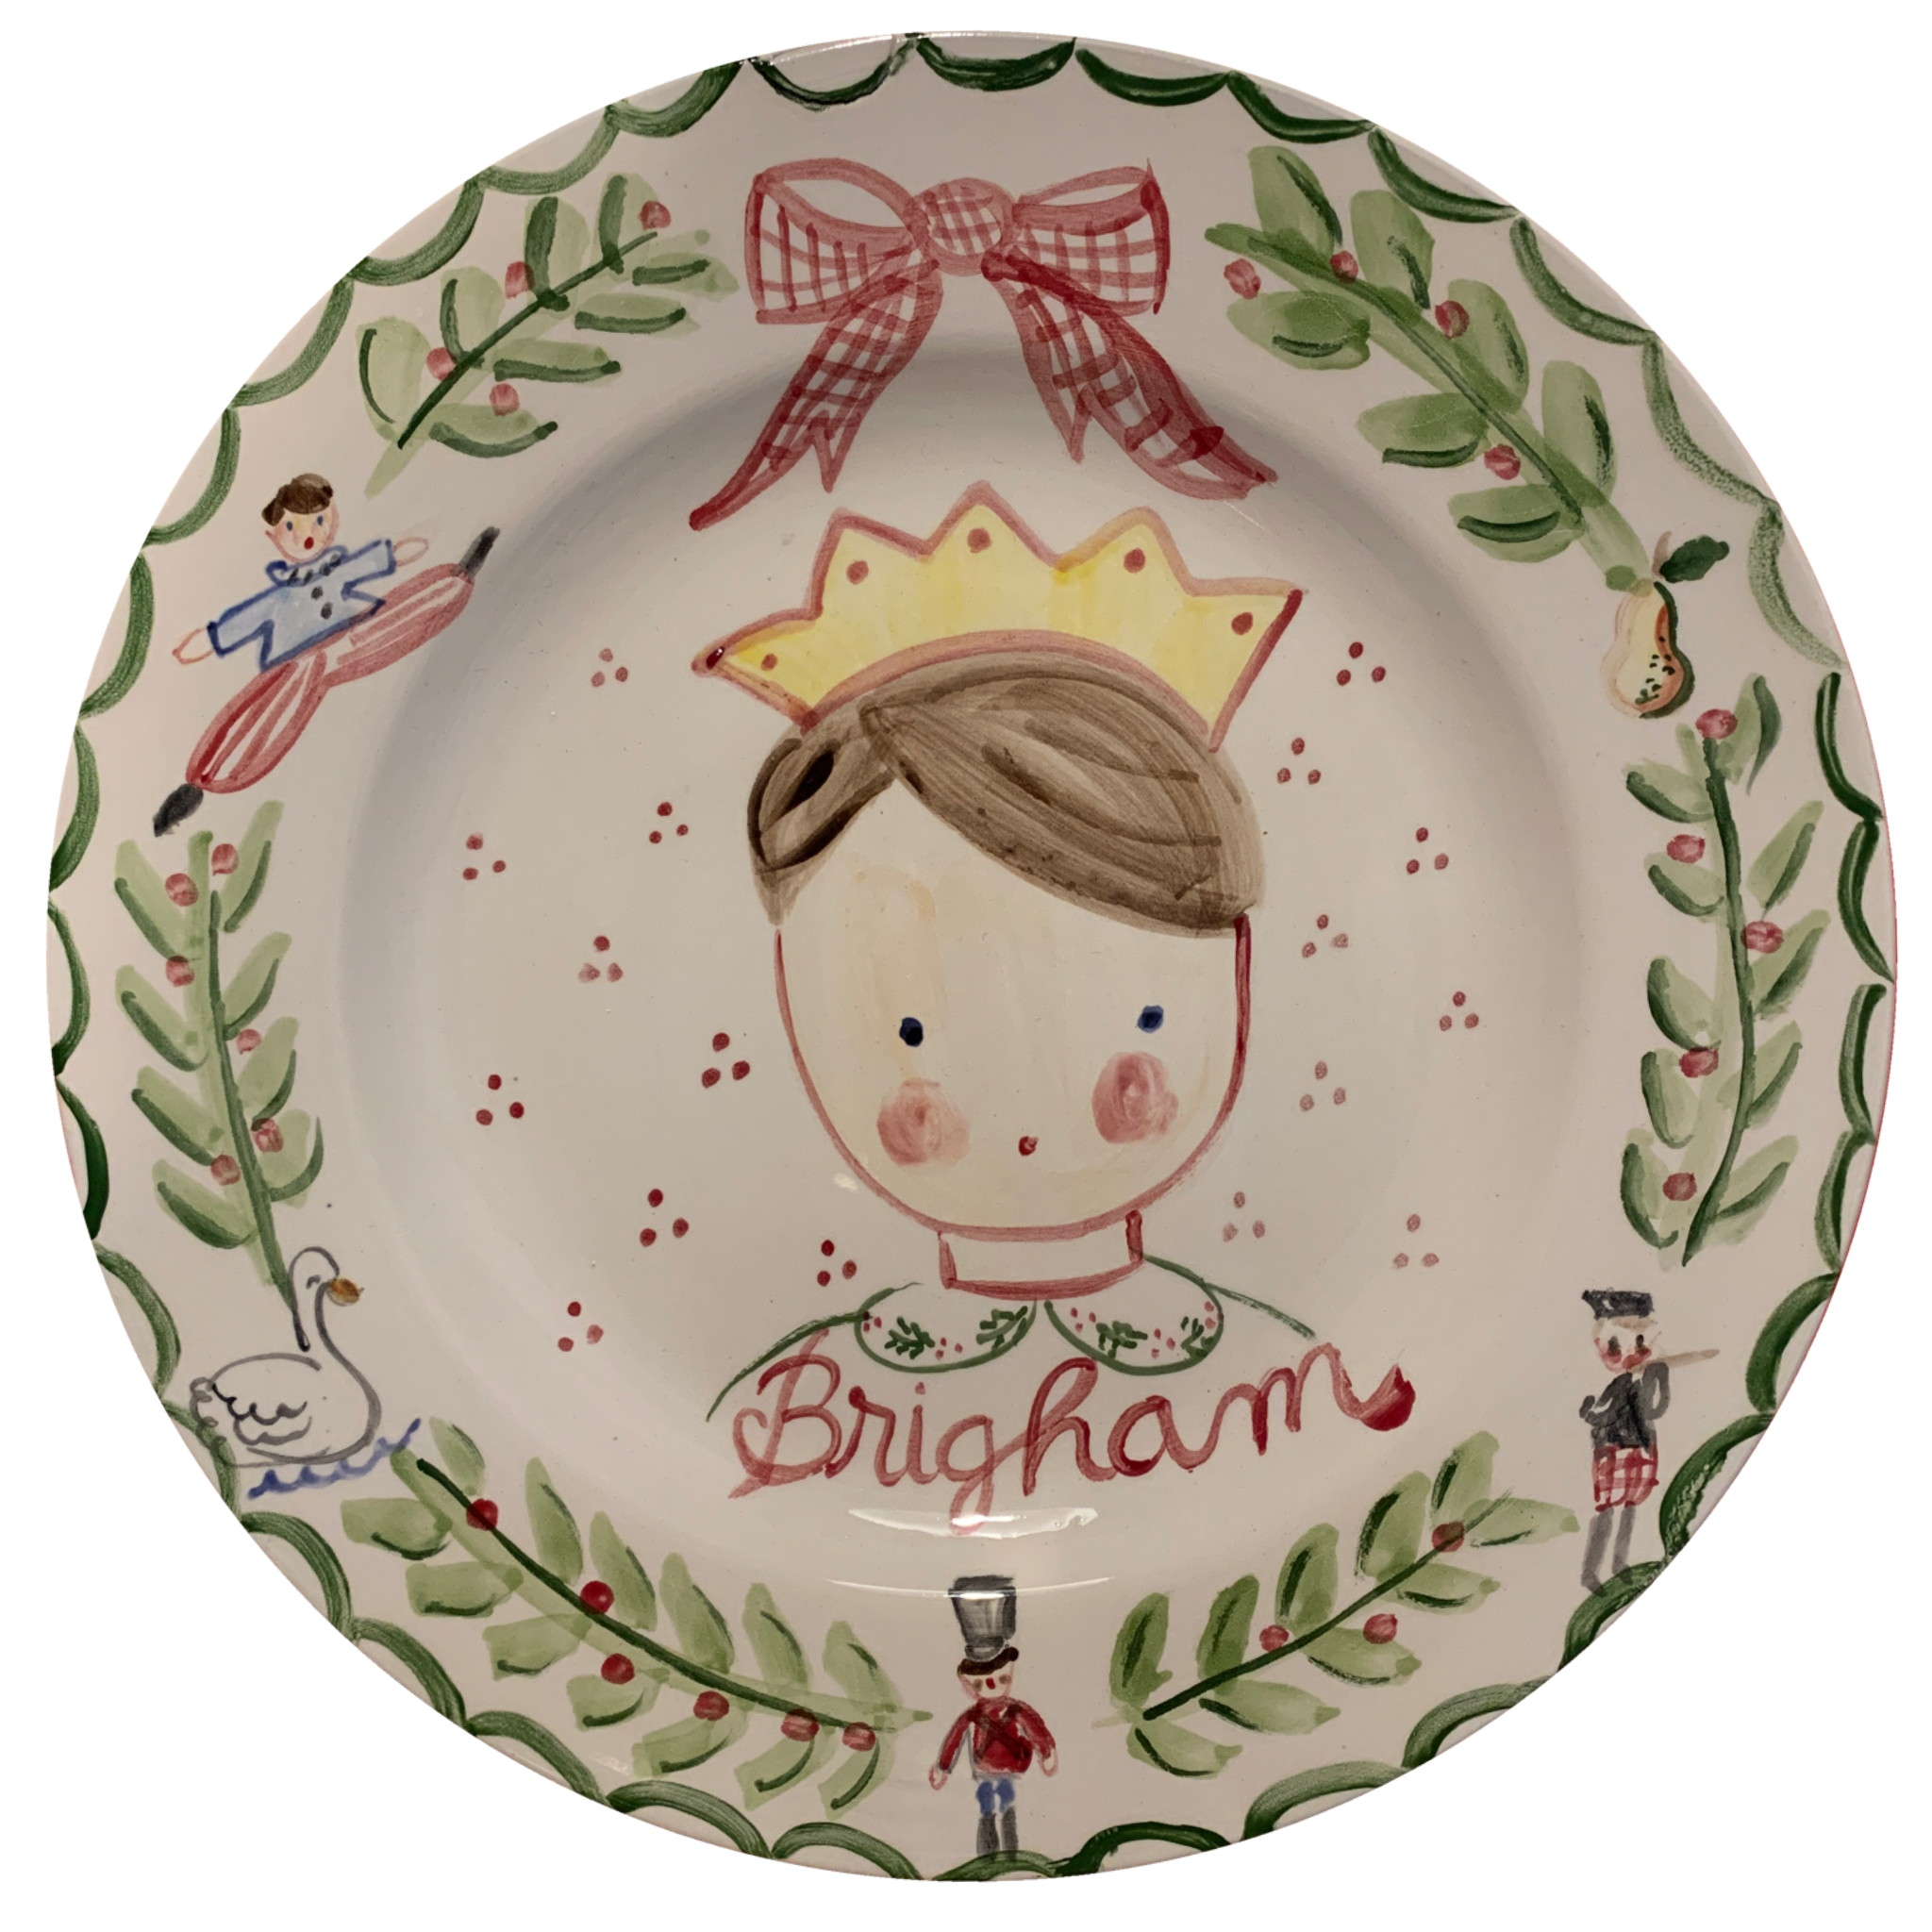 Tricia Lowenfield Design X The Loveliest Home - 12 Days of Christmas Plate - Boy